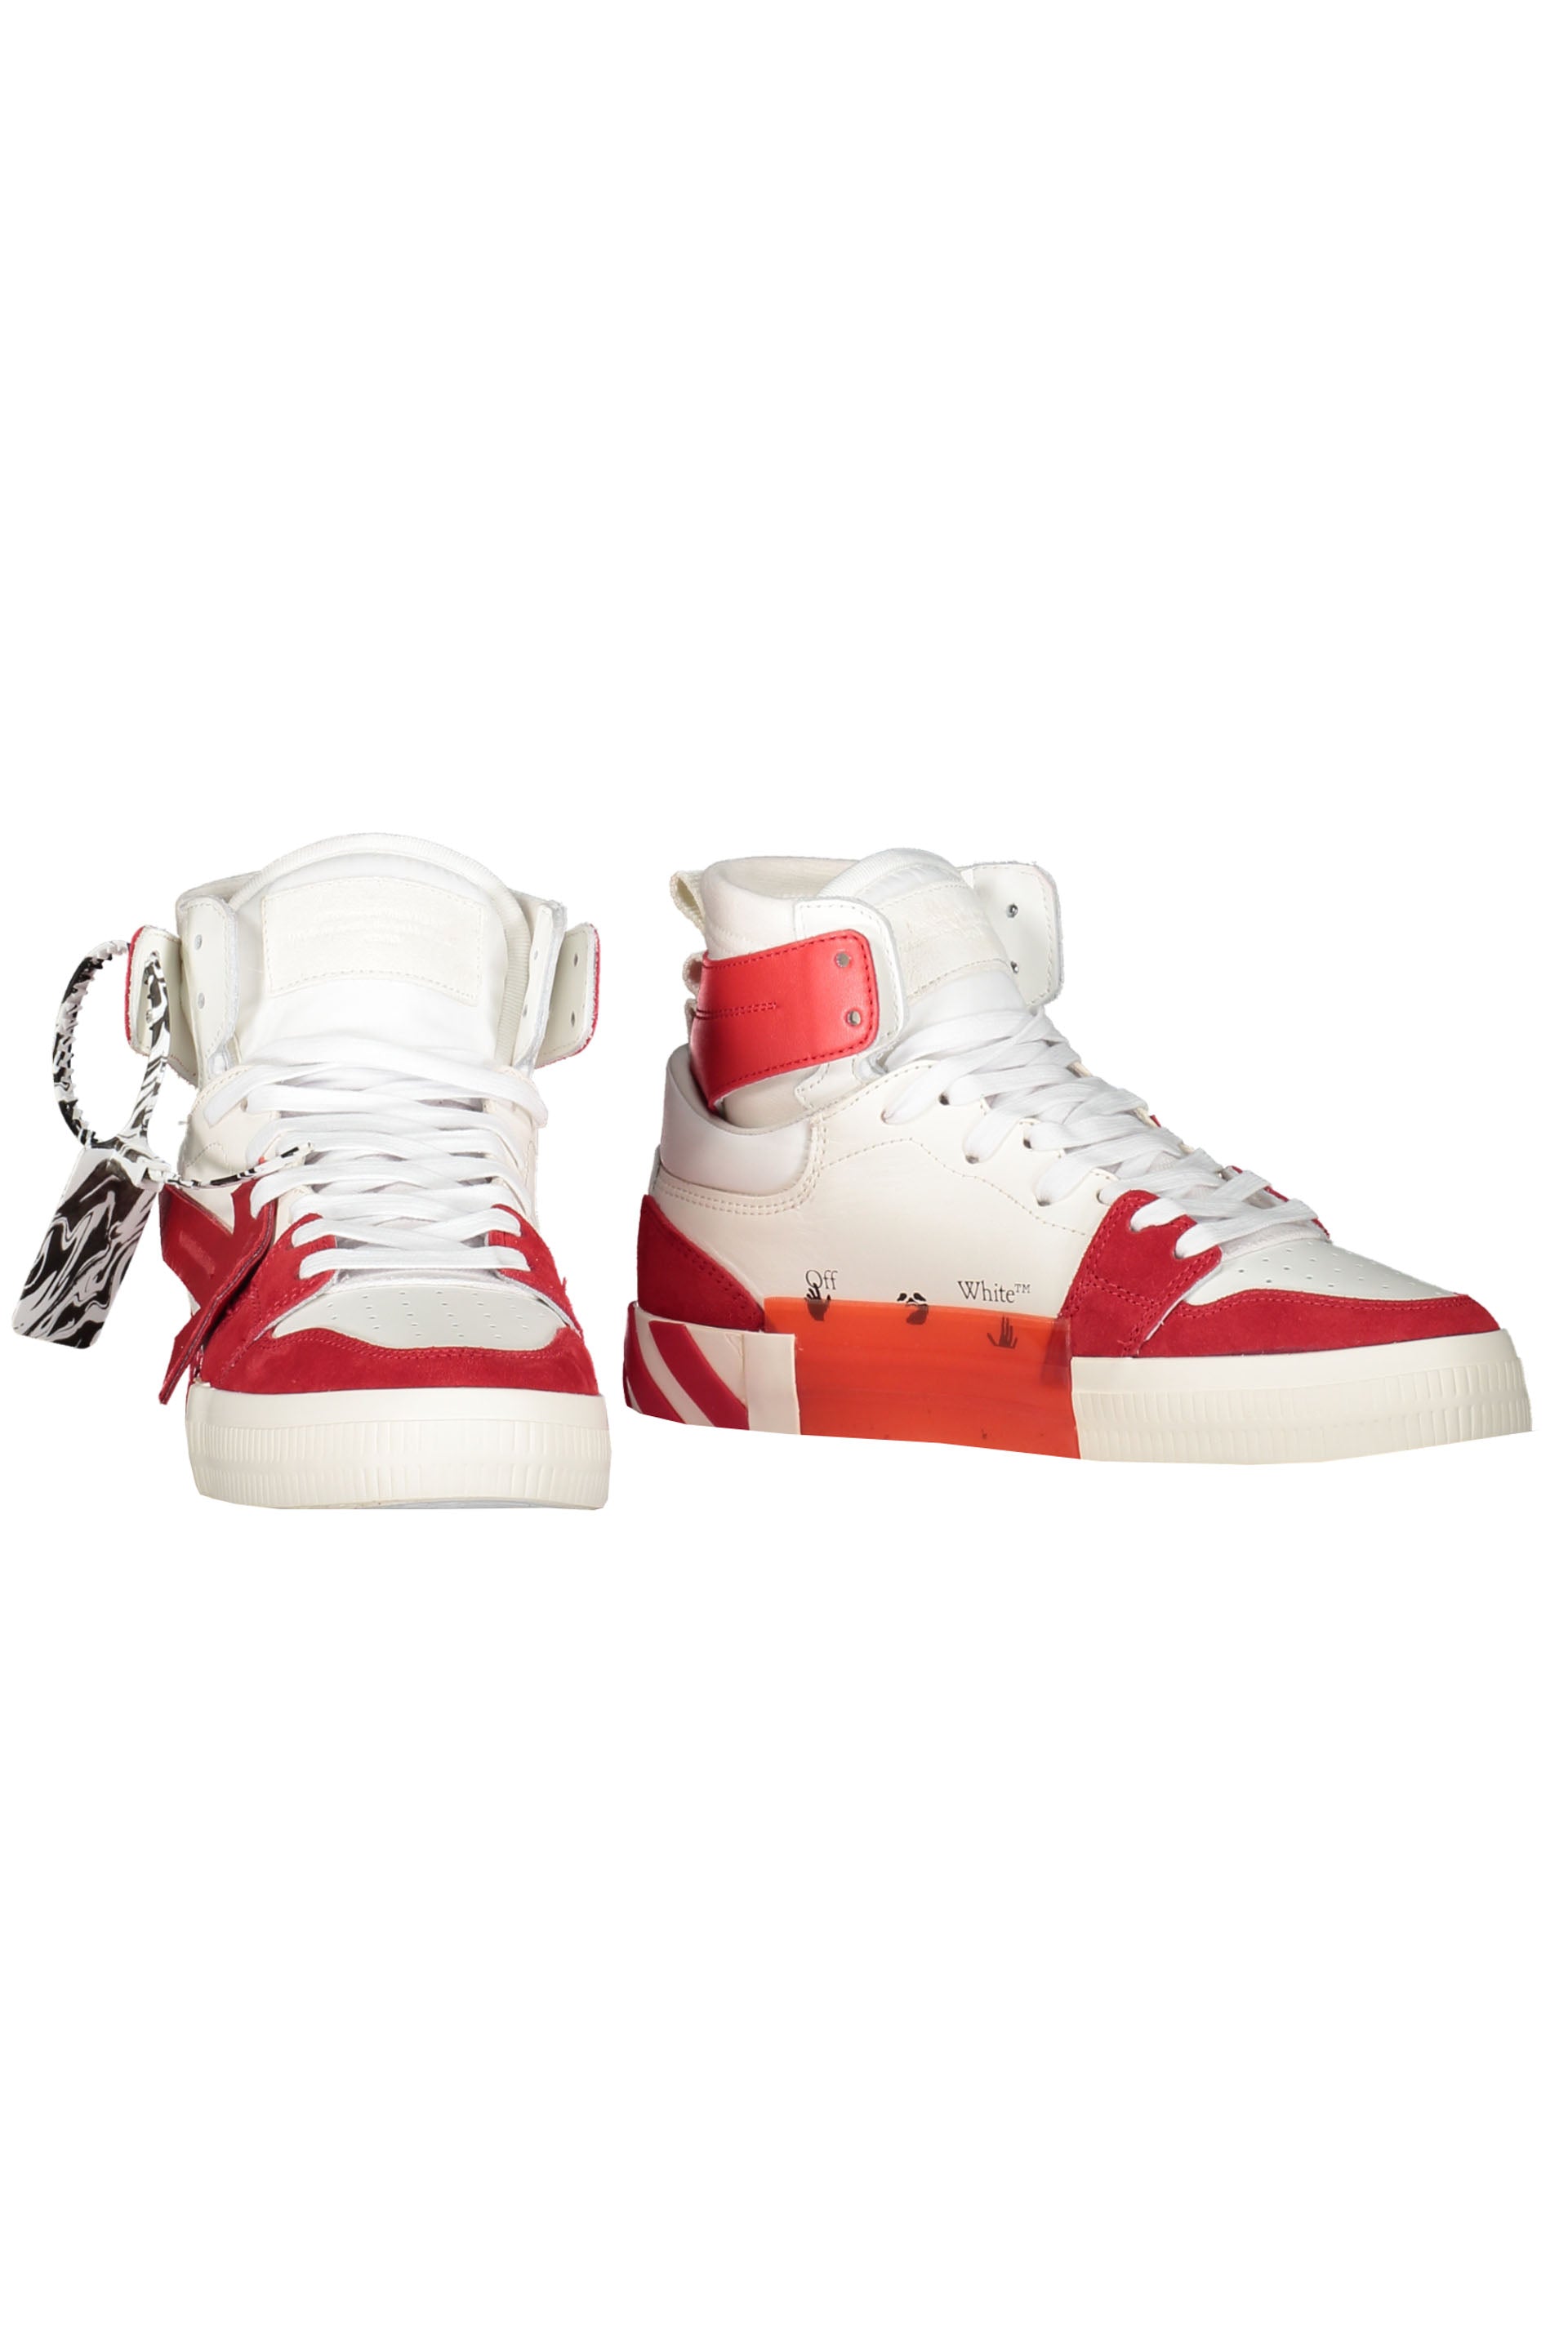 Off-White-OUTLET-SALE-Vulcanized-High-top-sneakers-Sneakers-ARCHIVE-COLLECTION-2_0b2d8f42-0a1f-45d4-a006-83d7e2db53fb.jpg